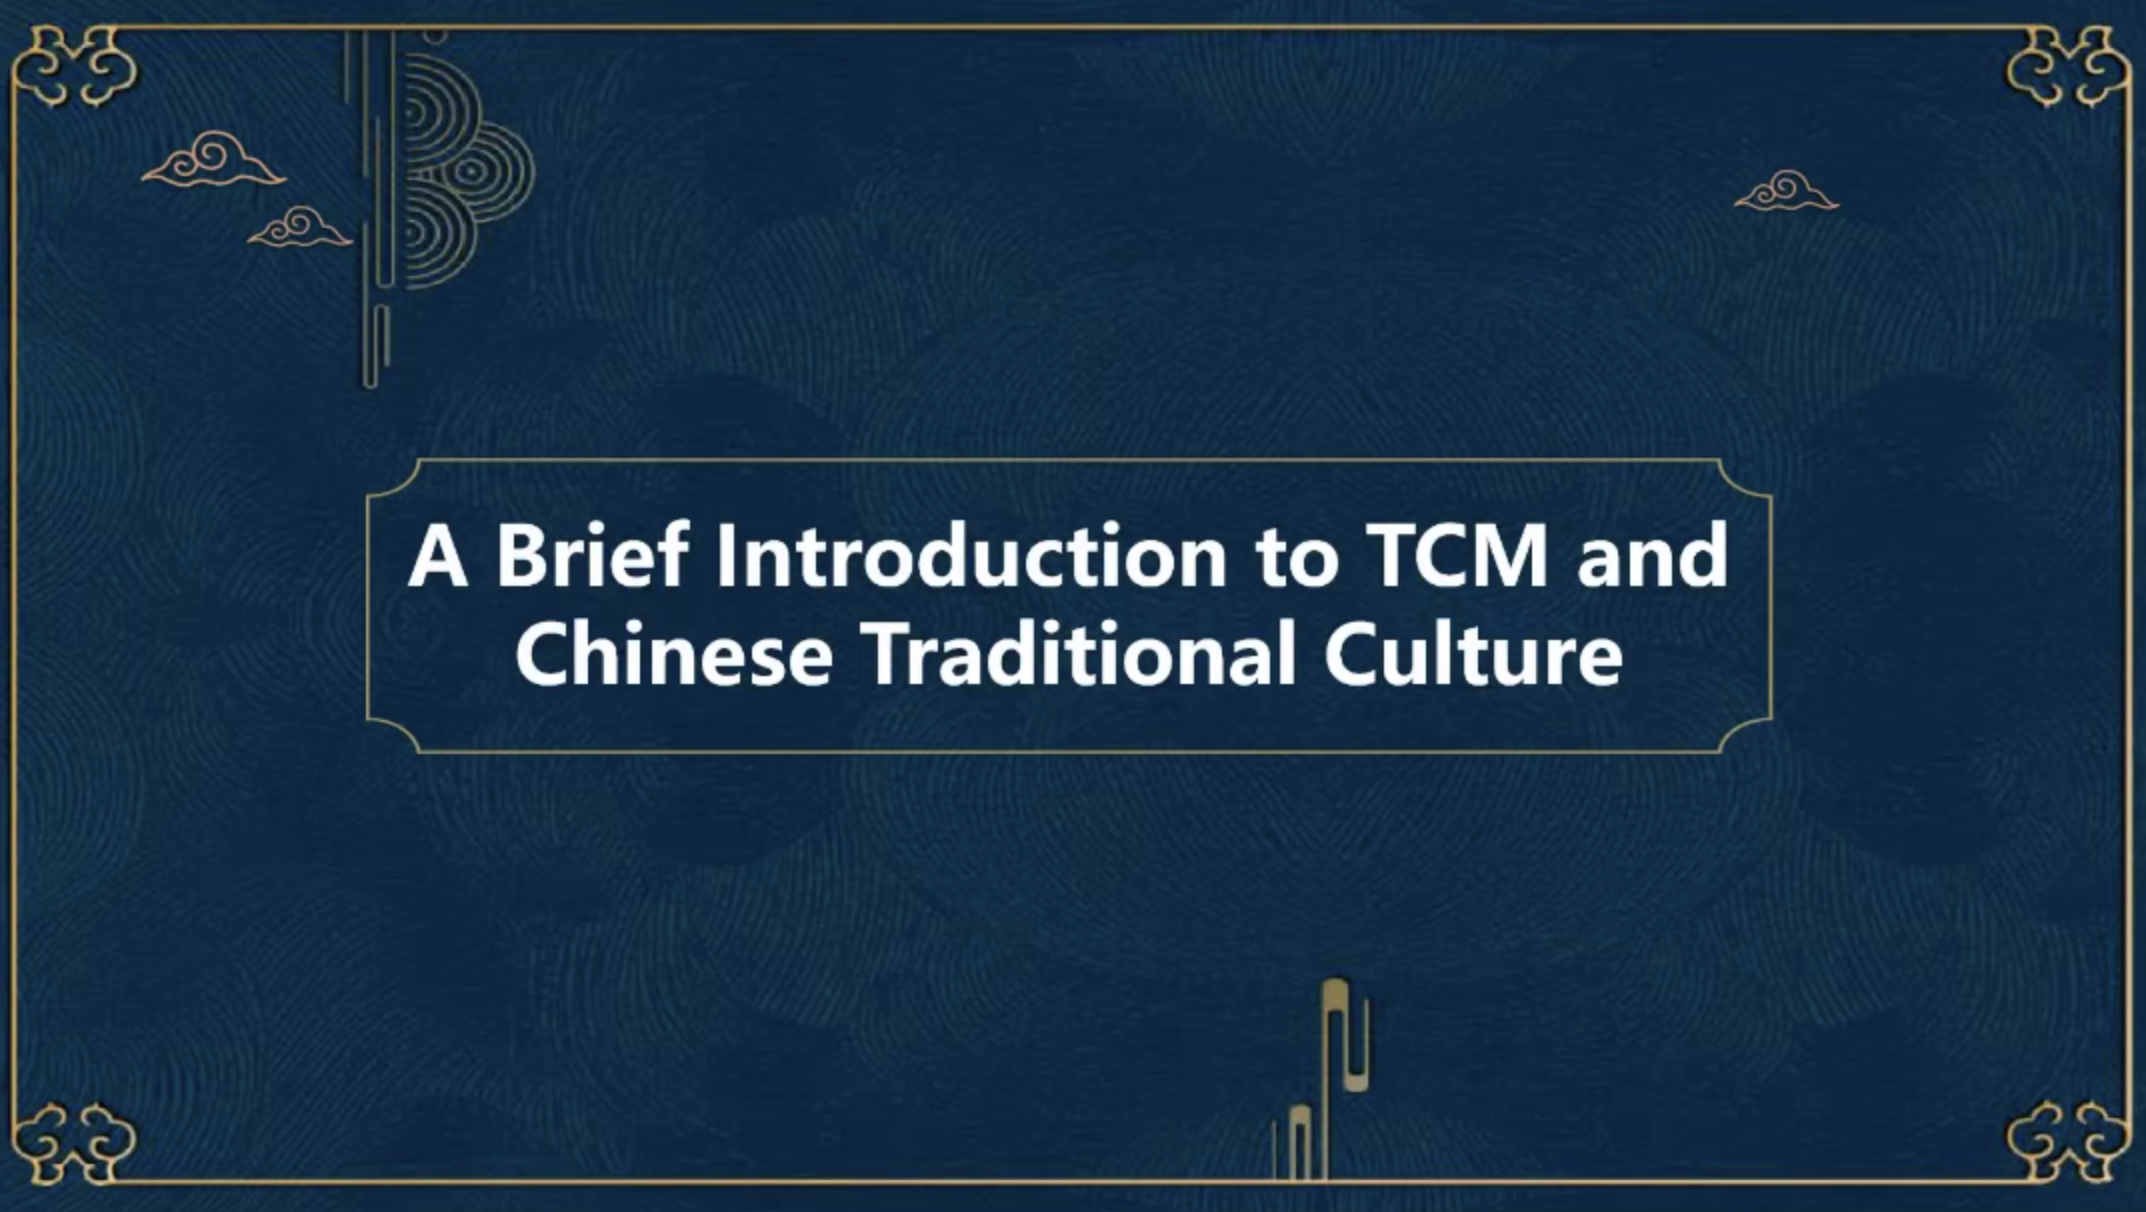 Wang lepeng+A Brief introduction to TCM and Chinese Traditional Culture